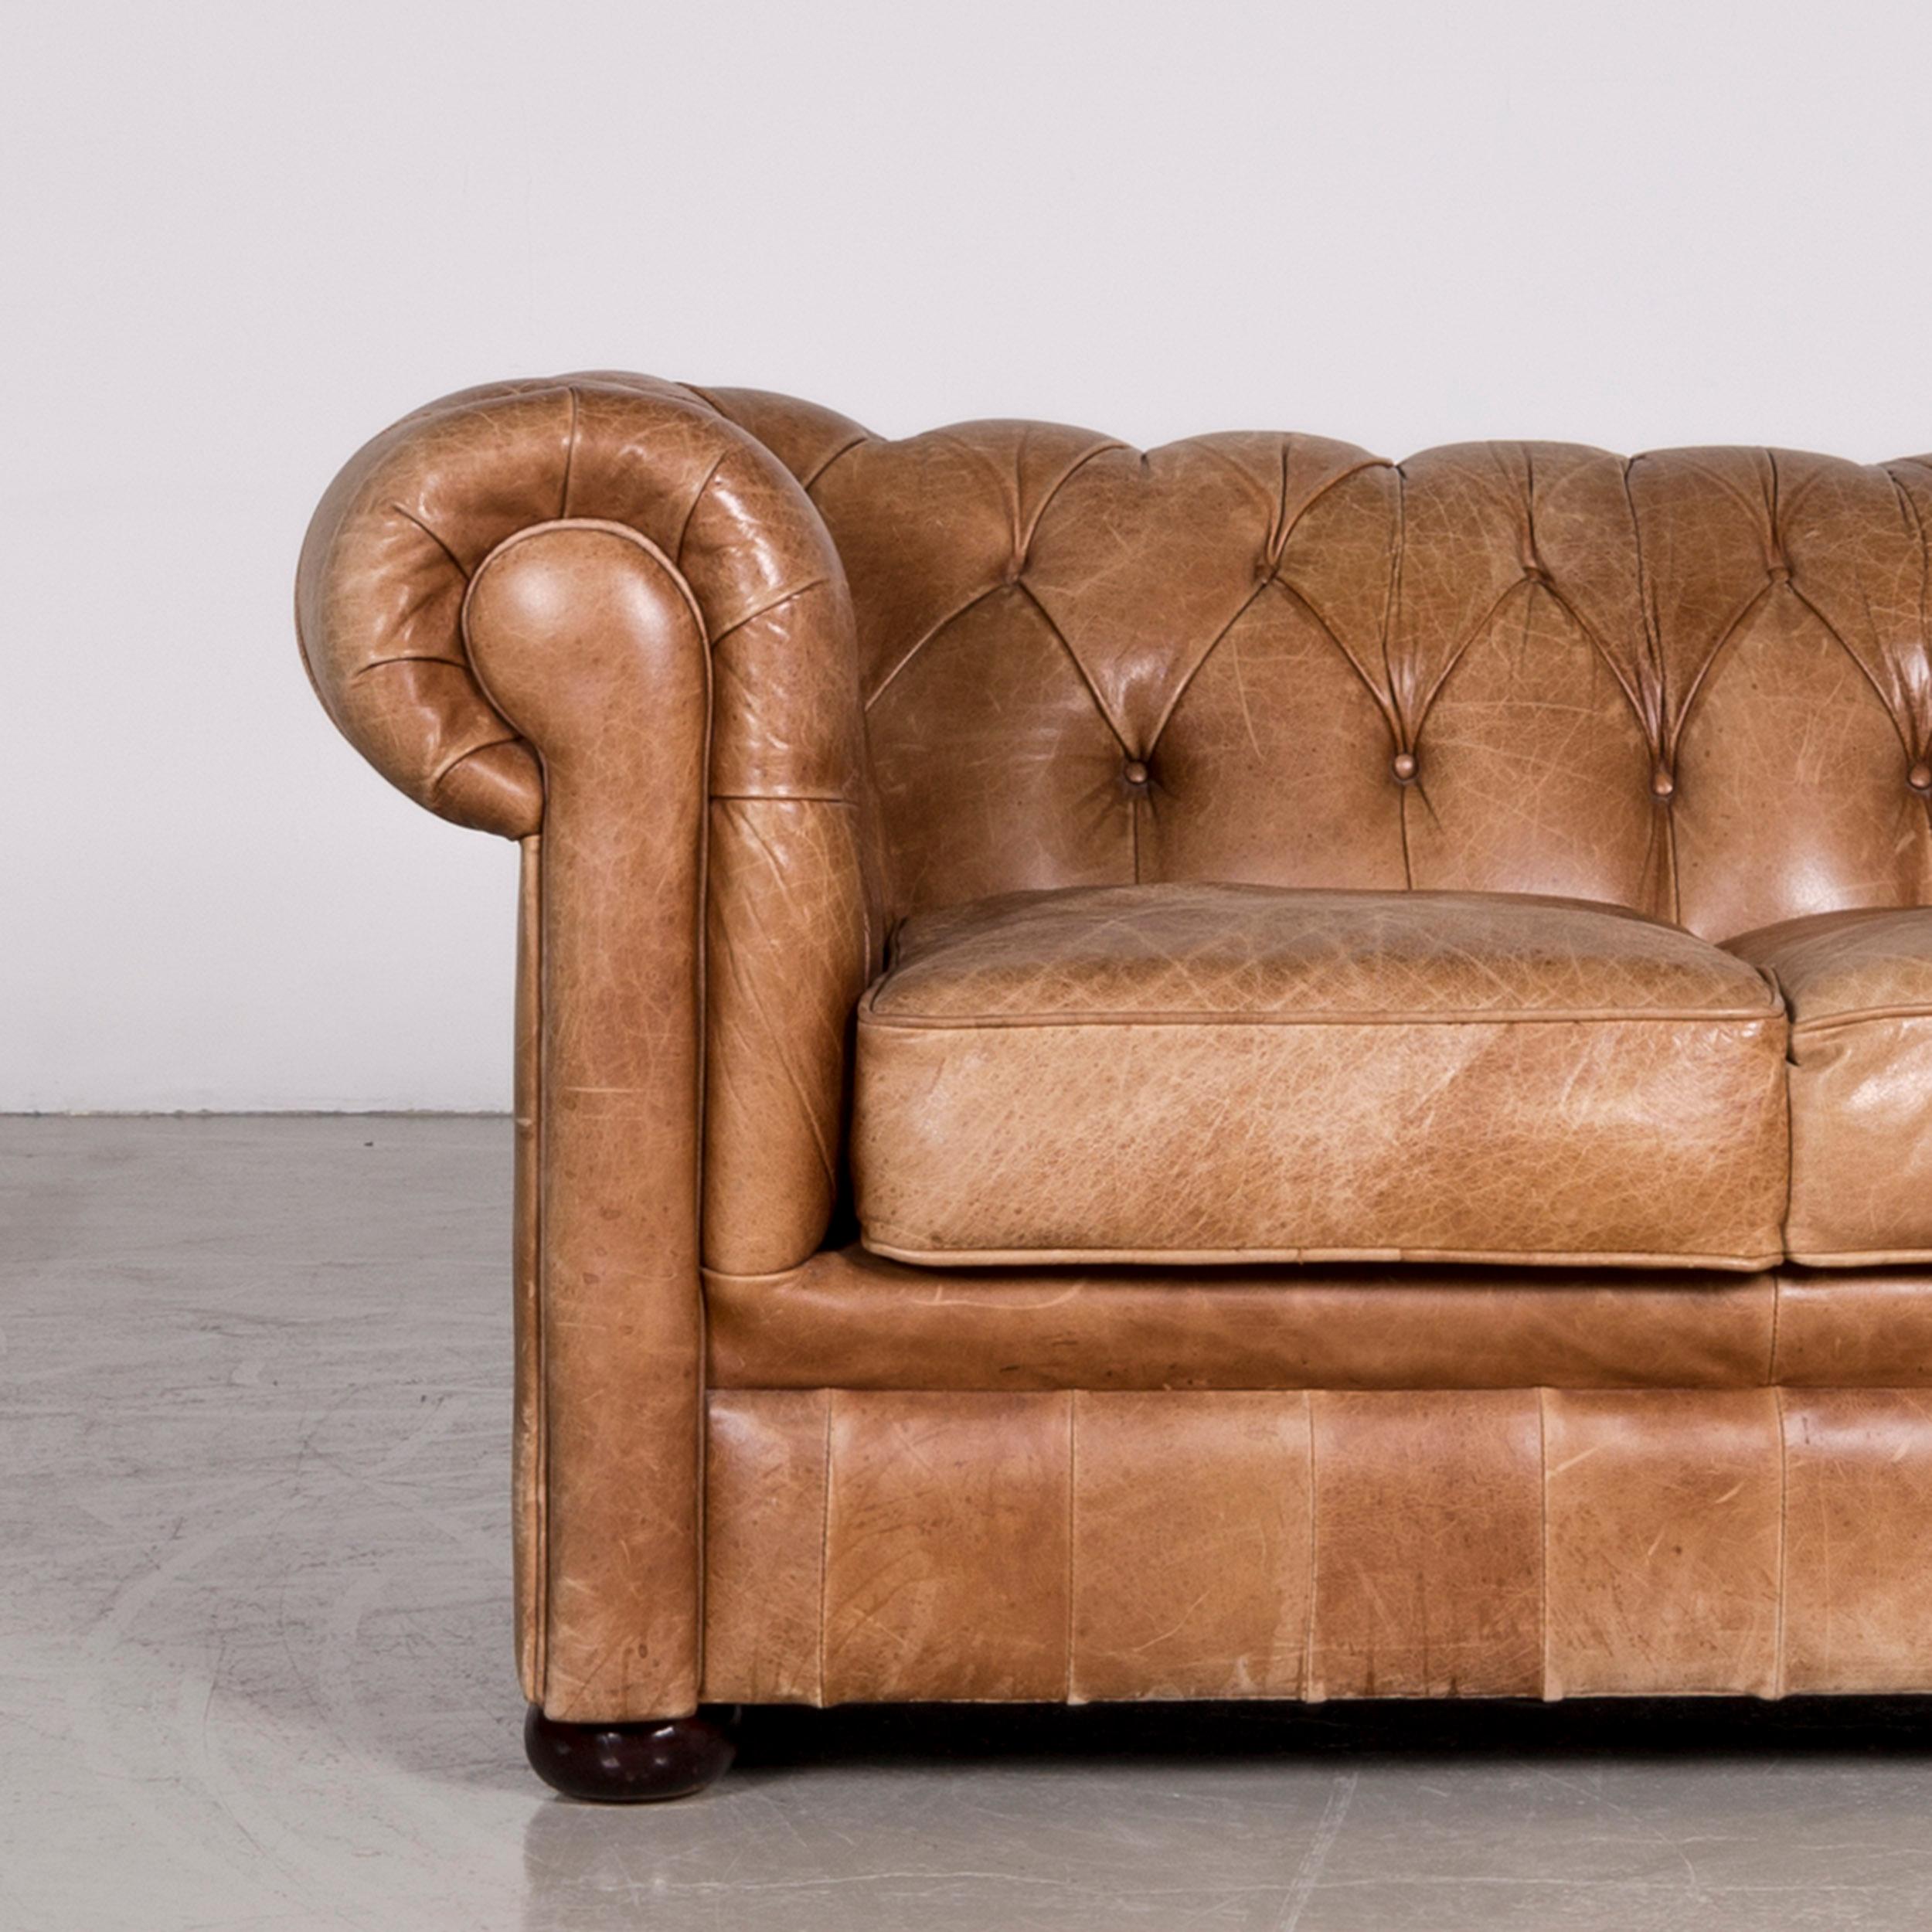 Chesterfield Leather Sofa Brown Red Vintage Two-Seat Couch In Fair Condition For Sale In Cologne, DE